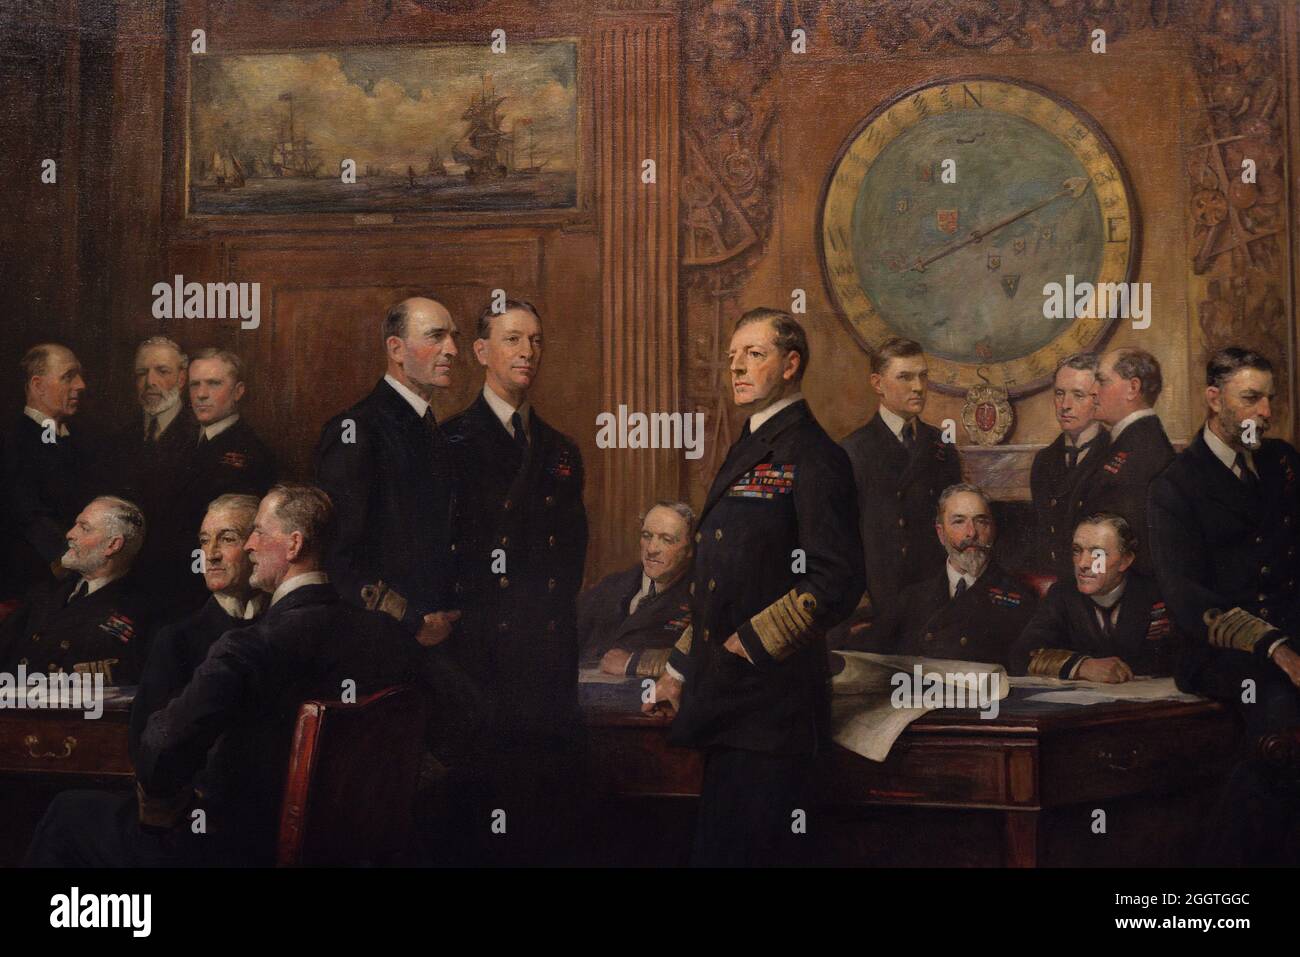 Naval Officers of World War I. Painting by Arthur Stockdale Cope (1857-1940). Oil on canvas (264,1 x 514,4 cm), 1921. Detail. National Portrait Gallery. London, England, United Kingdom. Stock Photo